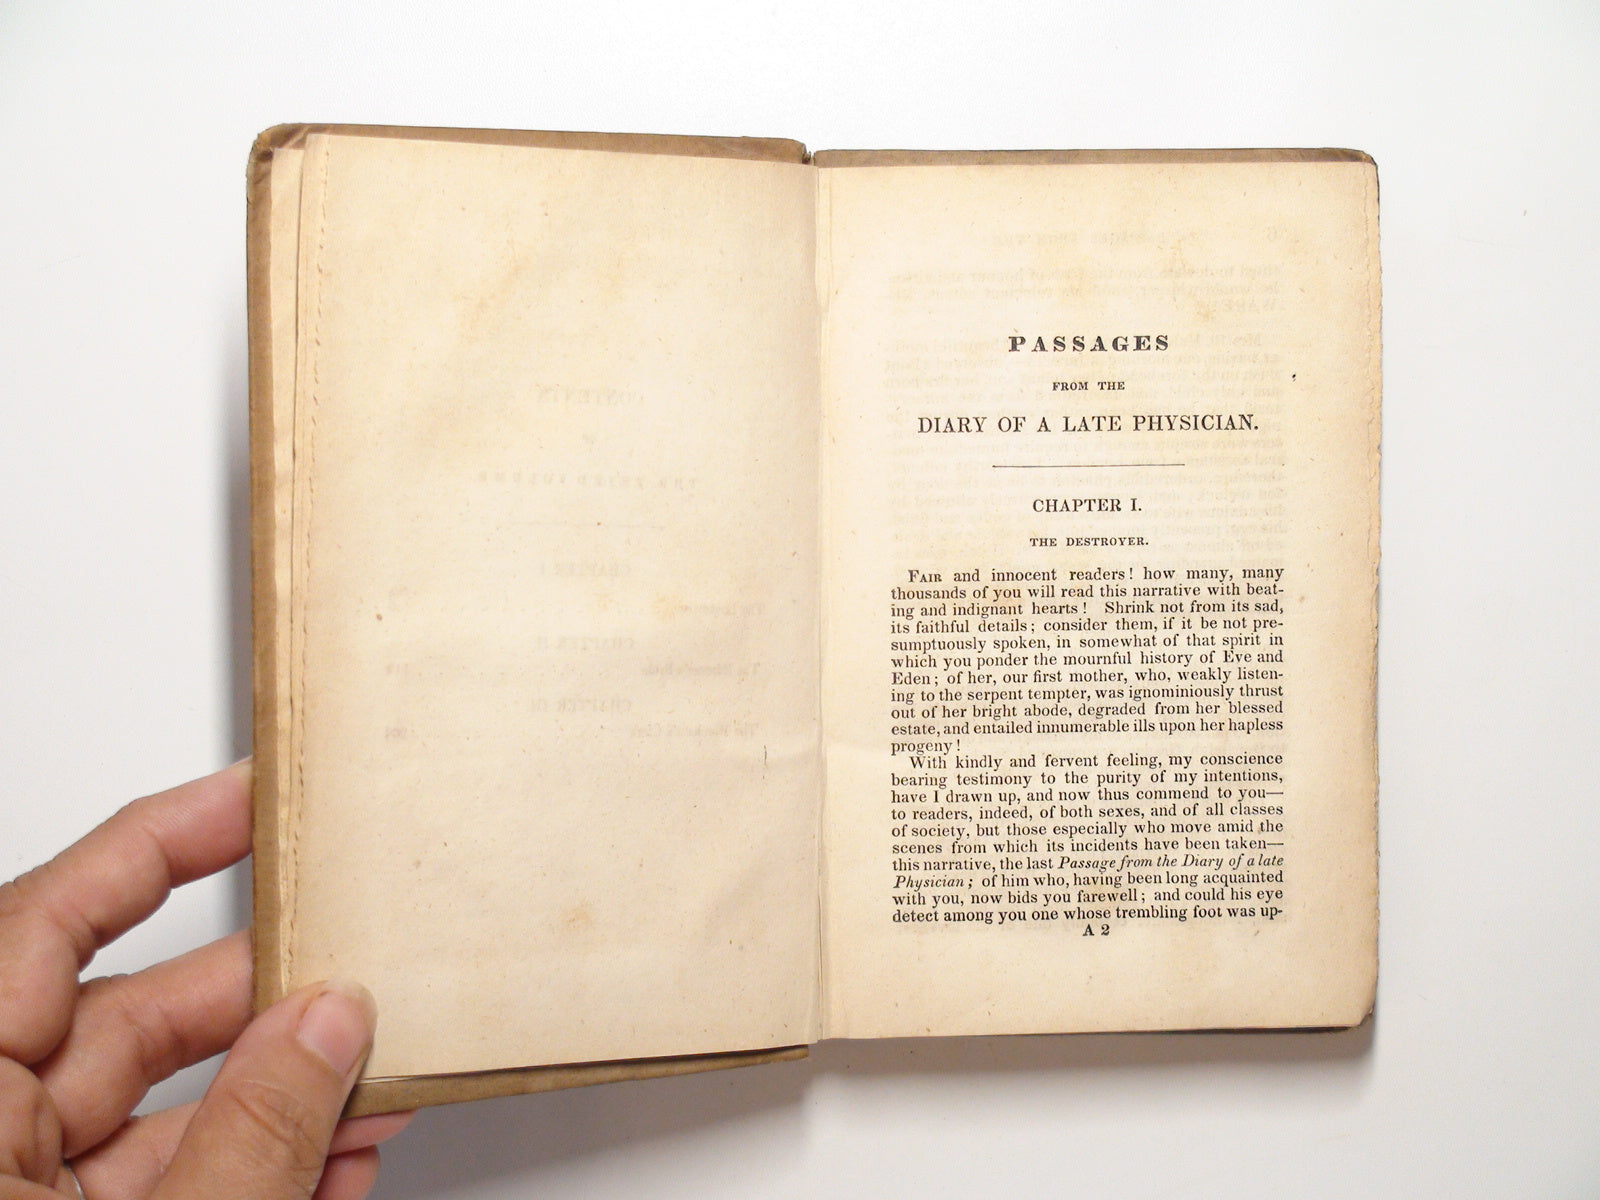 Affecting Scenes, Passages from the Diary of a Physician, 1831, Vol III, Warren